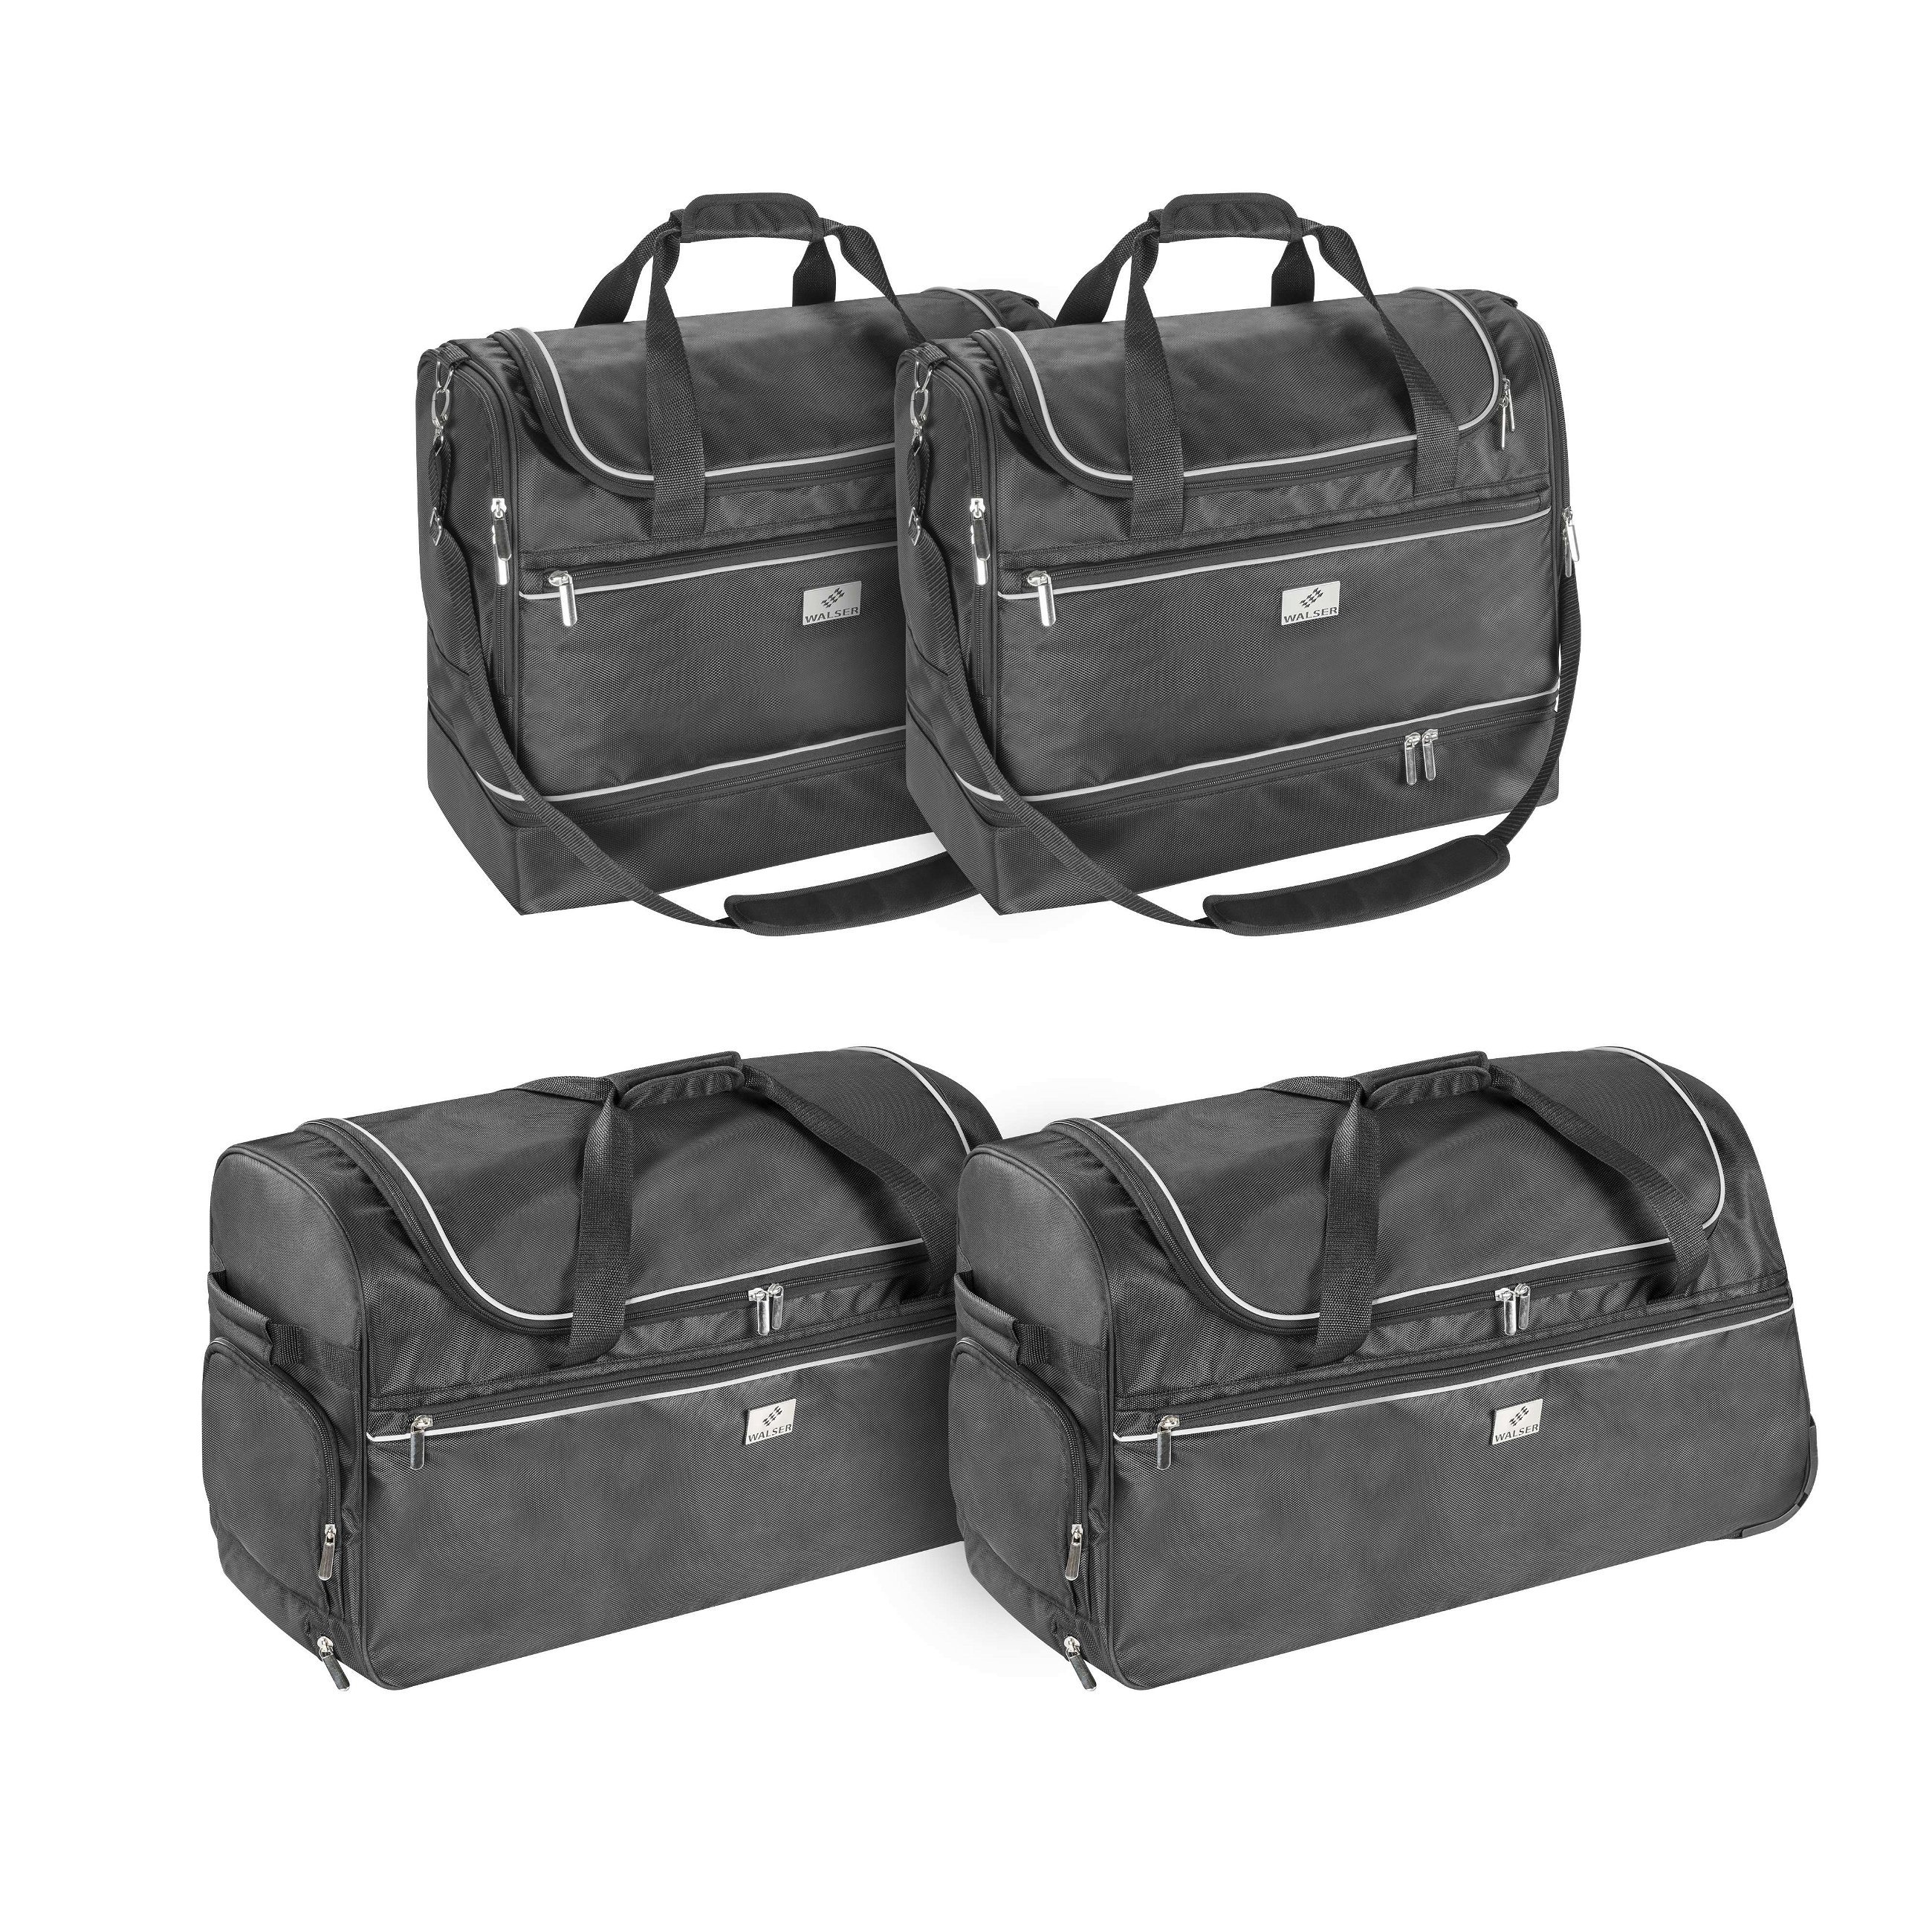 Carbags Travel Bag Set for BMW X3 G01 black